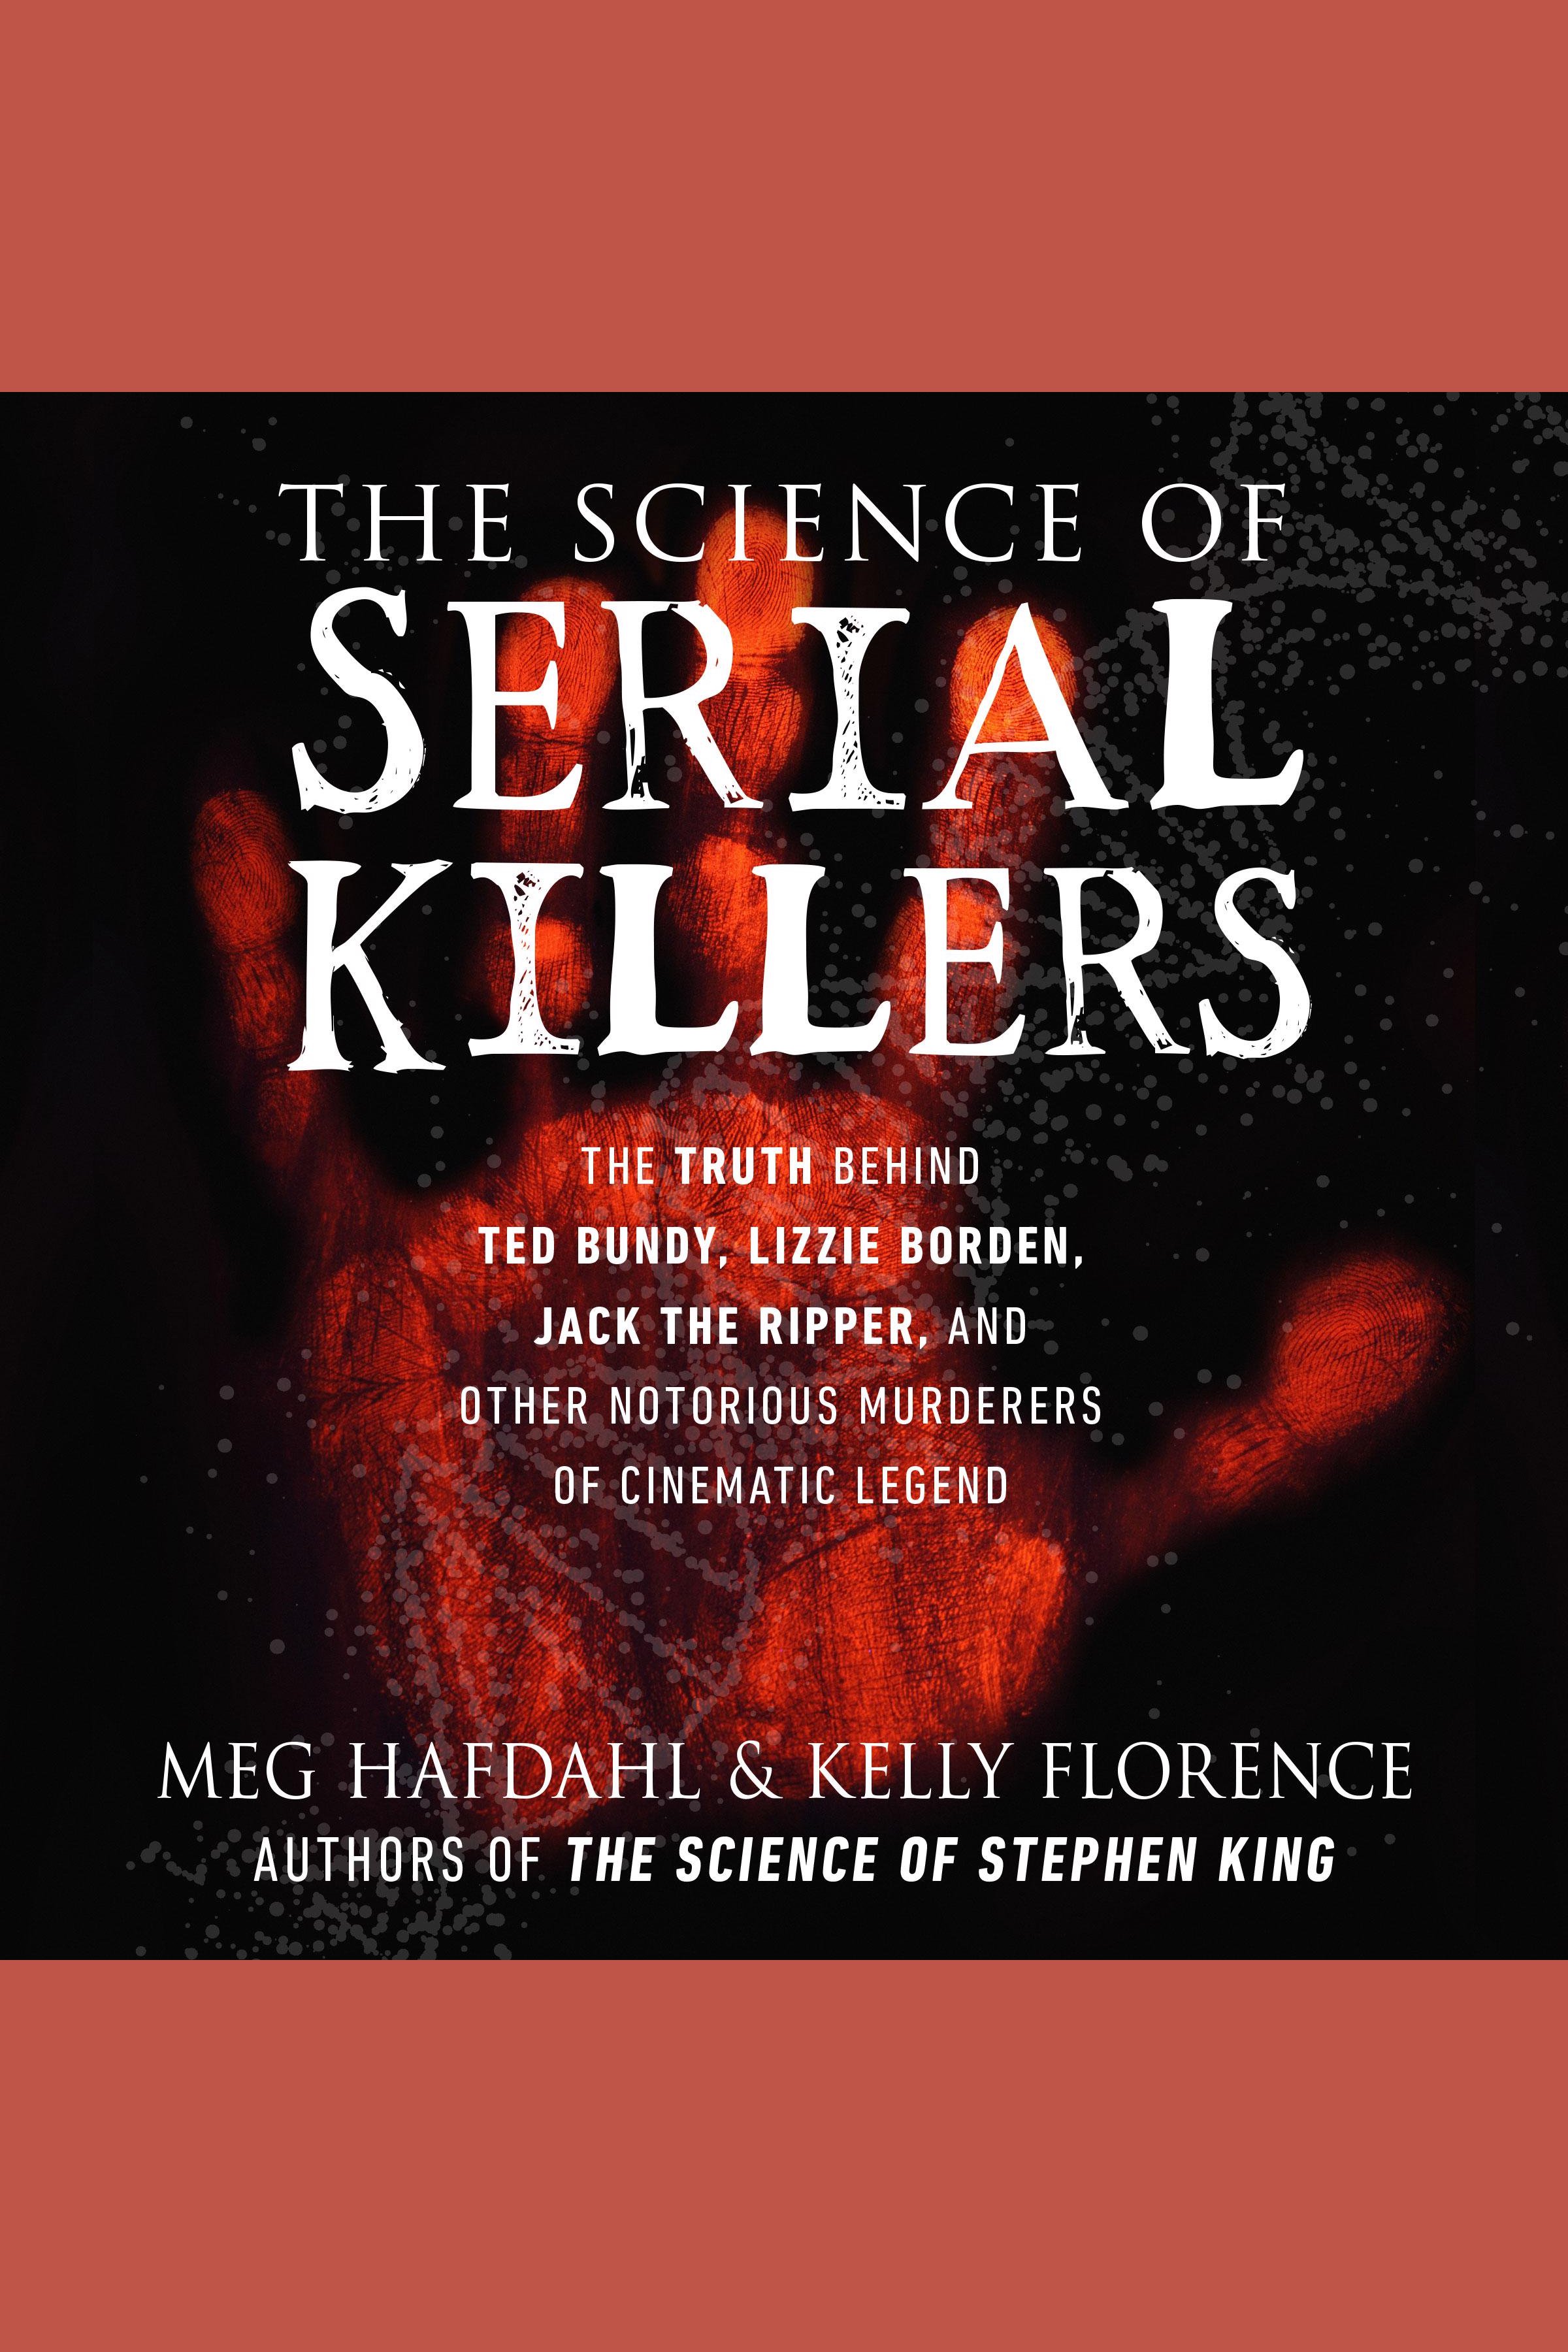 The Science of Serial Killers The Truth Behind Ted Bundy, Lizzie Borden, Jack the Ripper, and Other Notorious Murderers of Cinematic Legend cover image